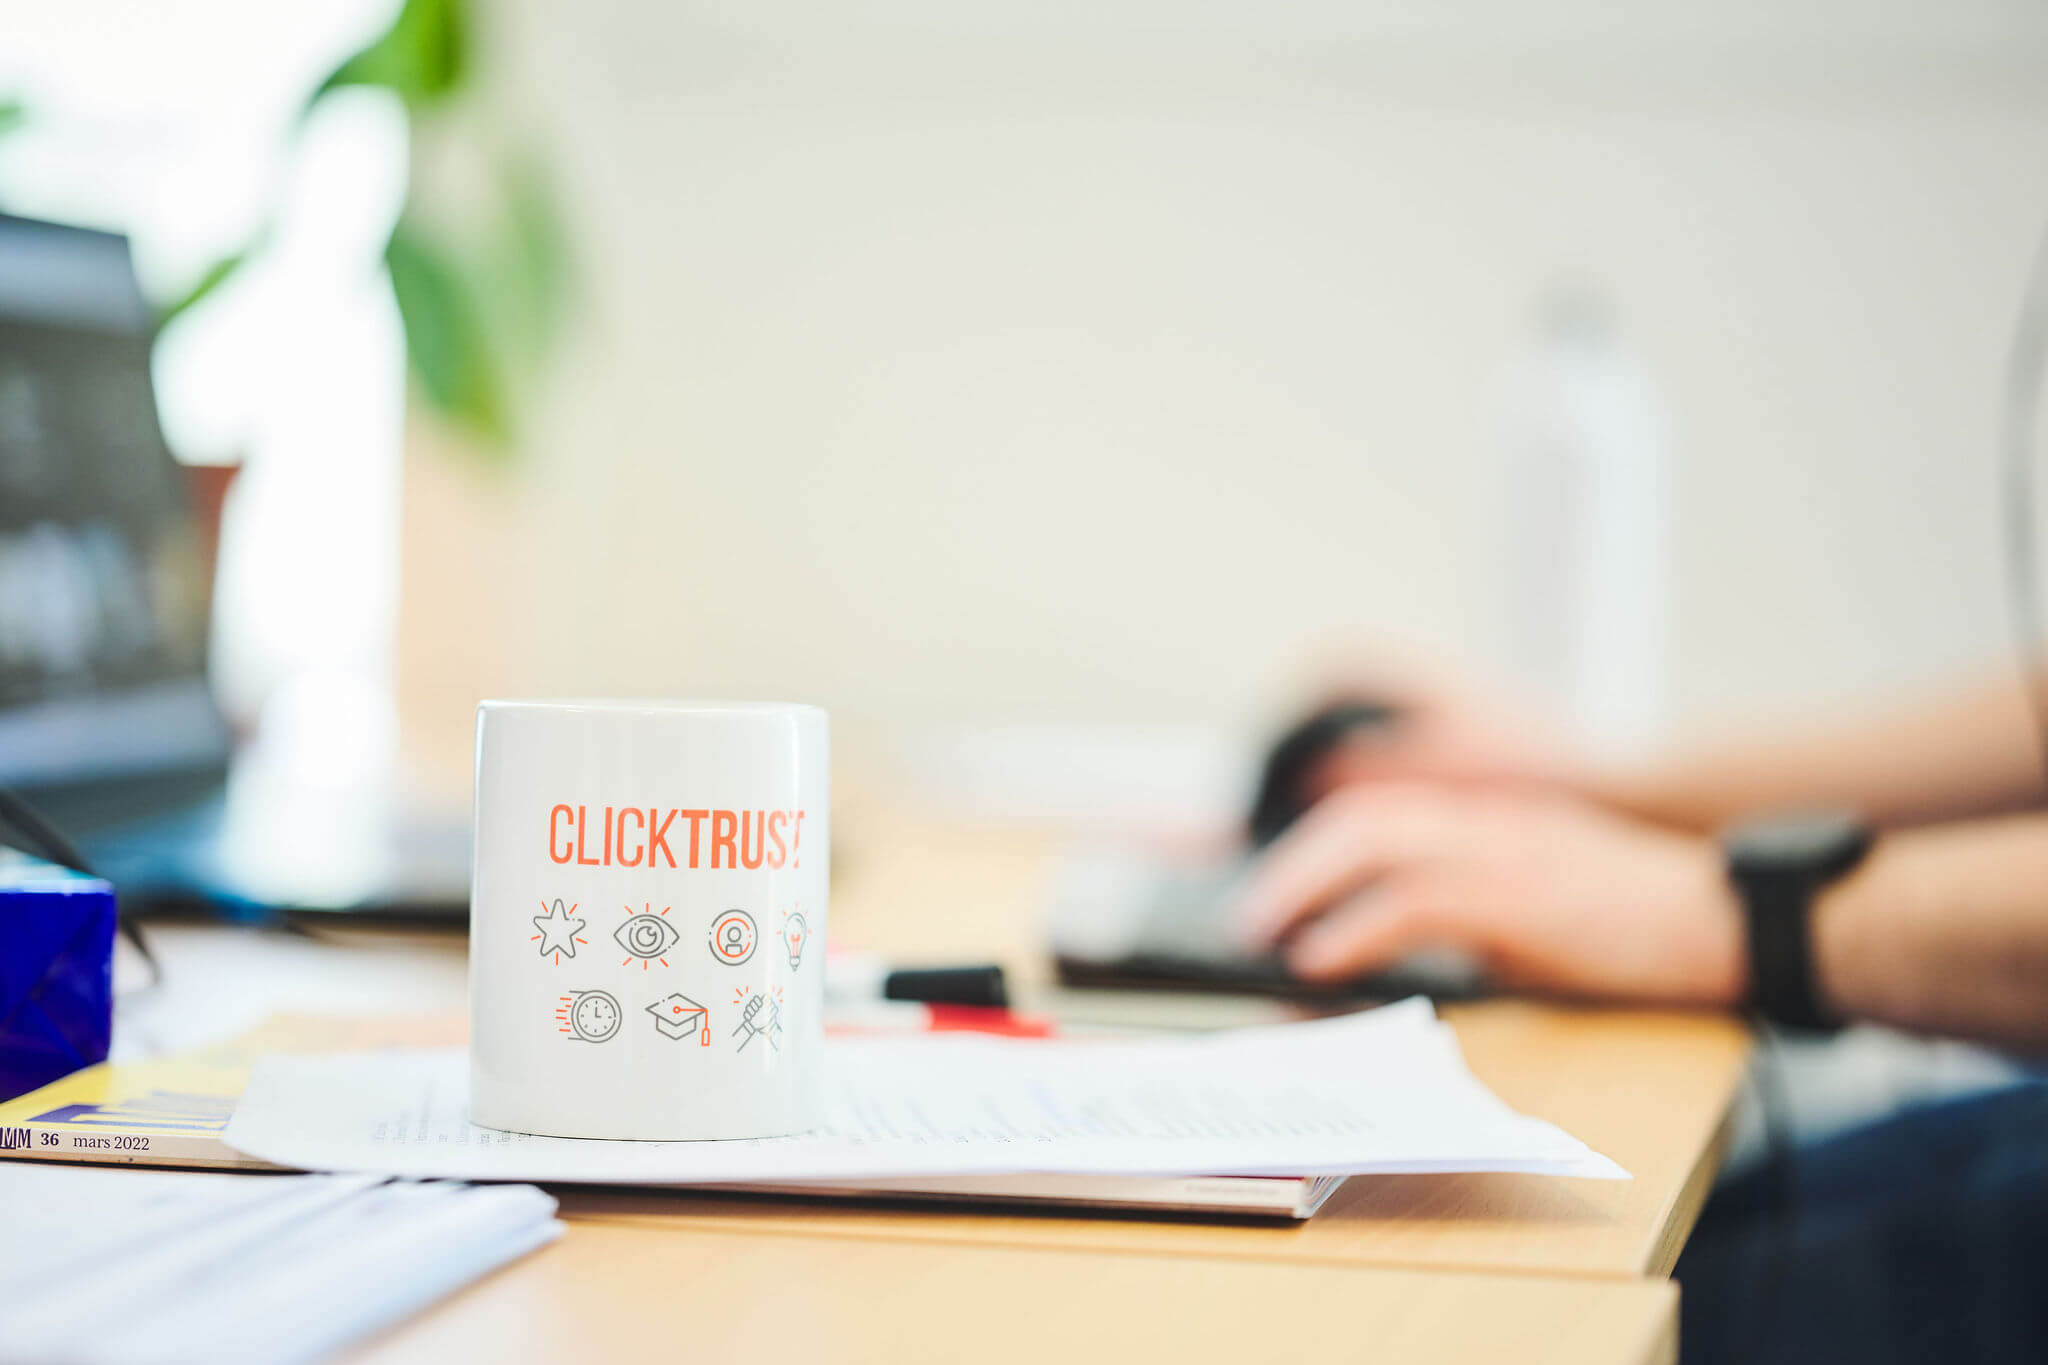 The CLICKTRUST monthly pick – November 2021